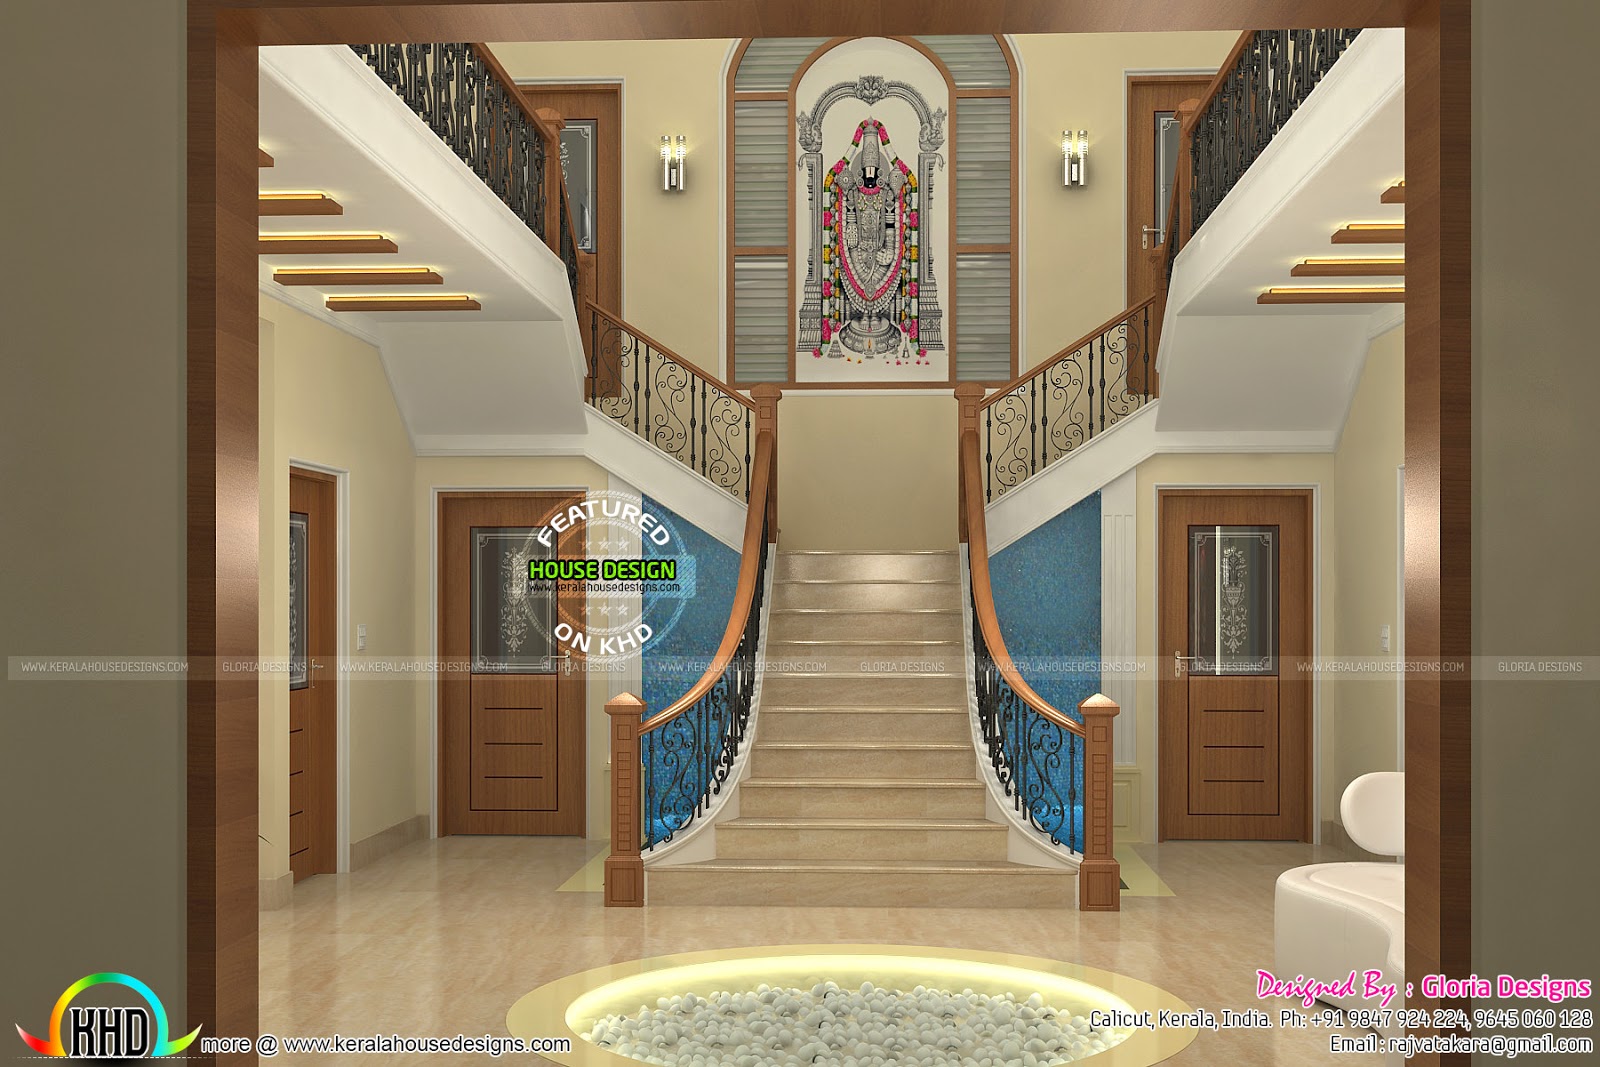 How a 3D  home  design  turned real Kerala home  design  and 